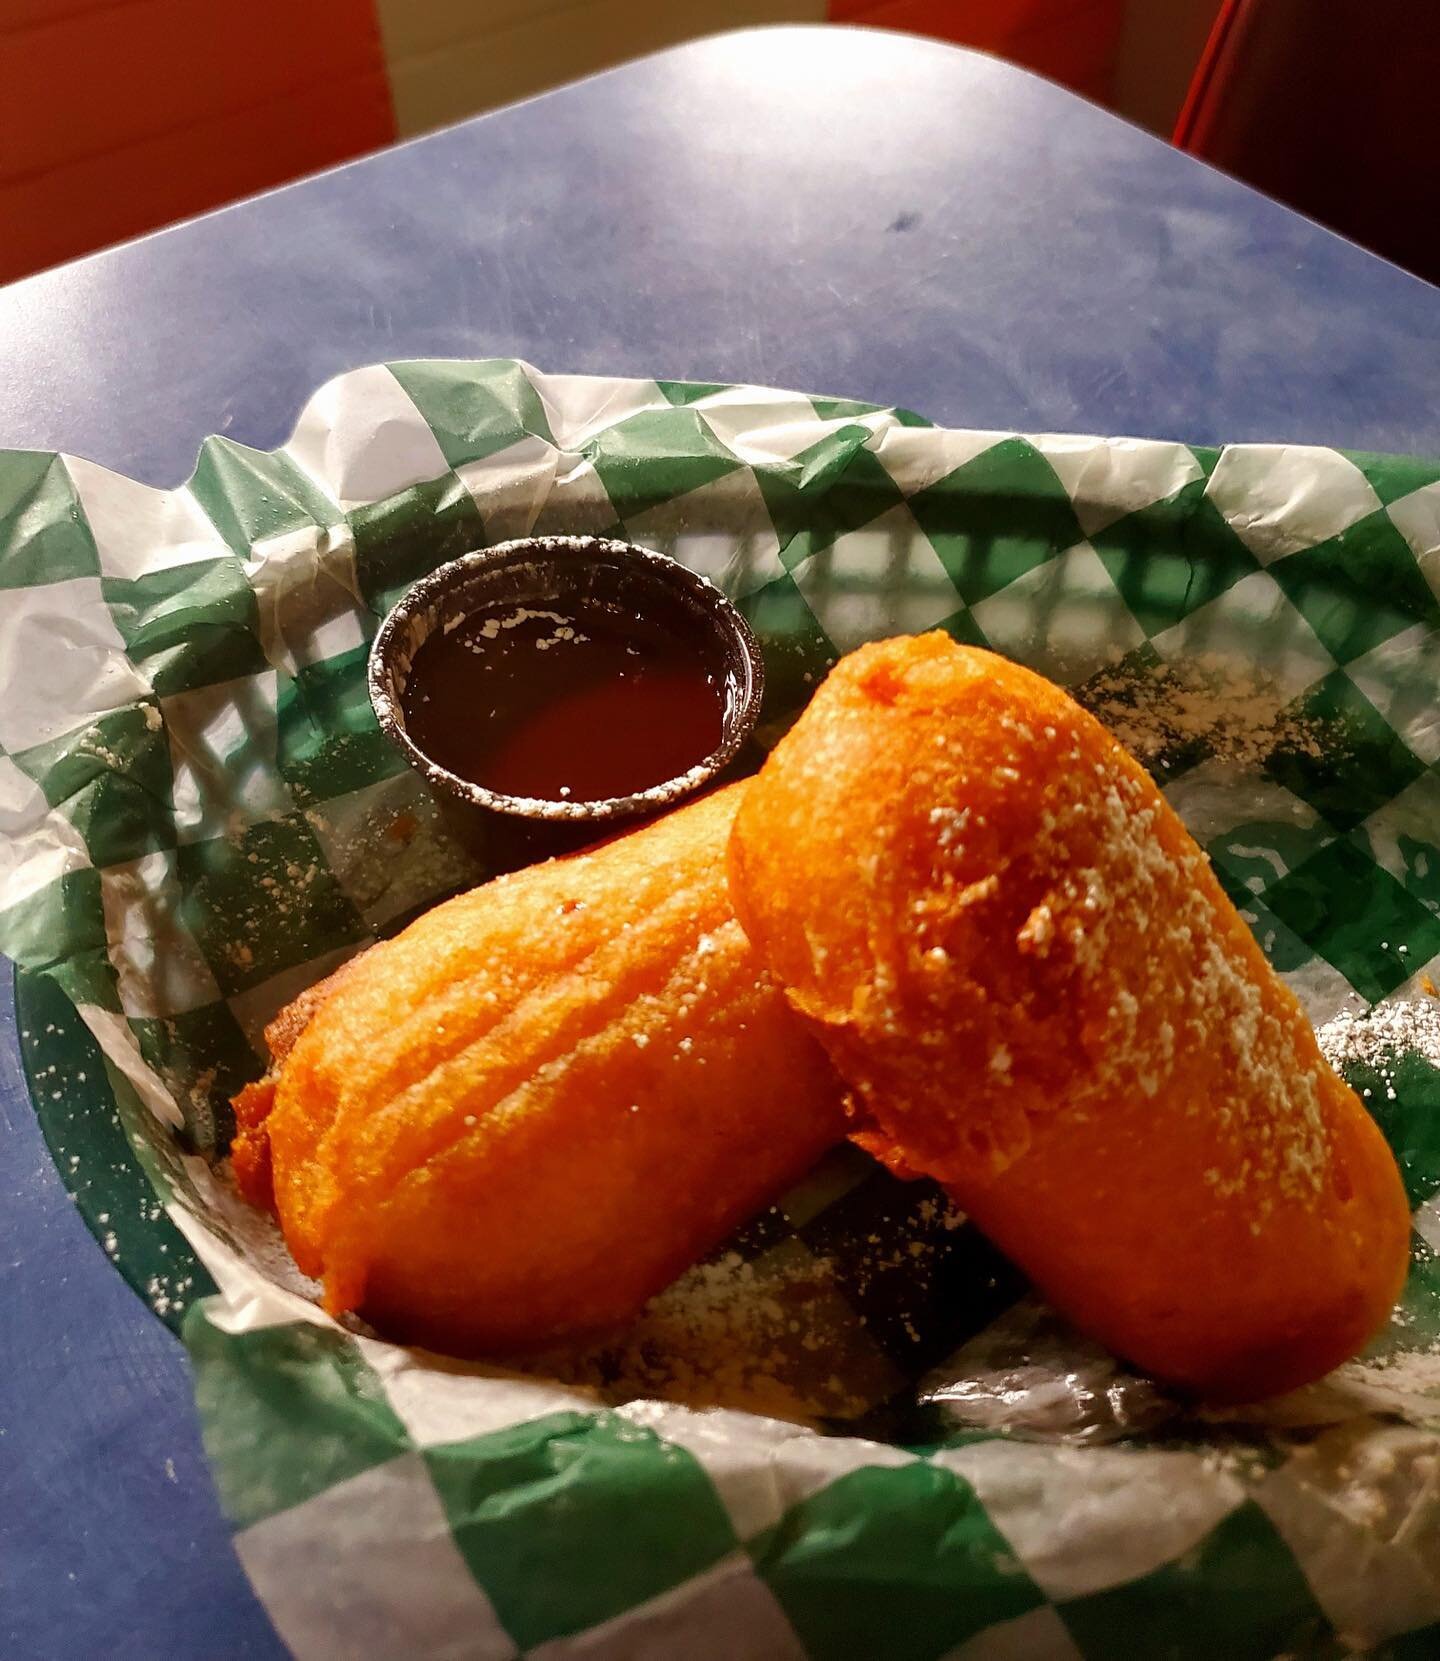 This weeks State Fair themed appetizer of the week: deep fried twinkies with a side of chocolate sauce! Get it while it lasts! Don&rsquo;t forget the Bart Simpson burger is available through the end of August!